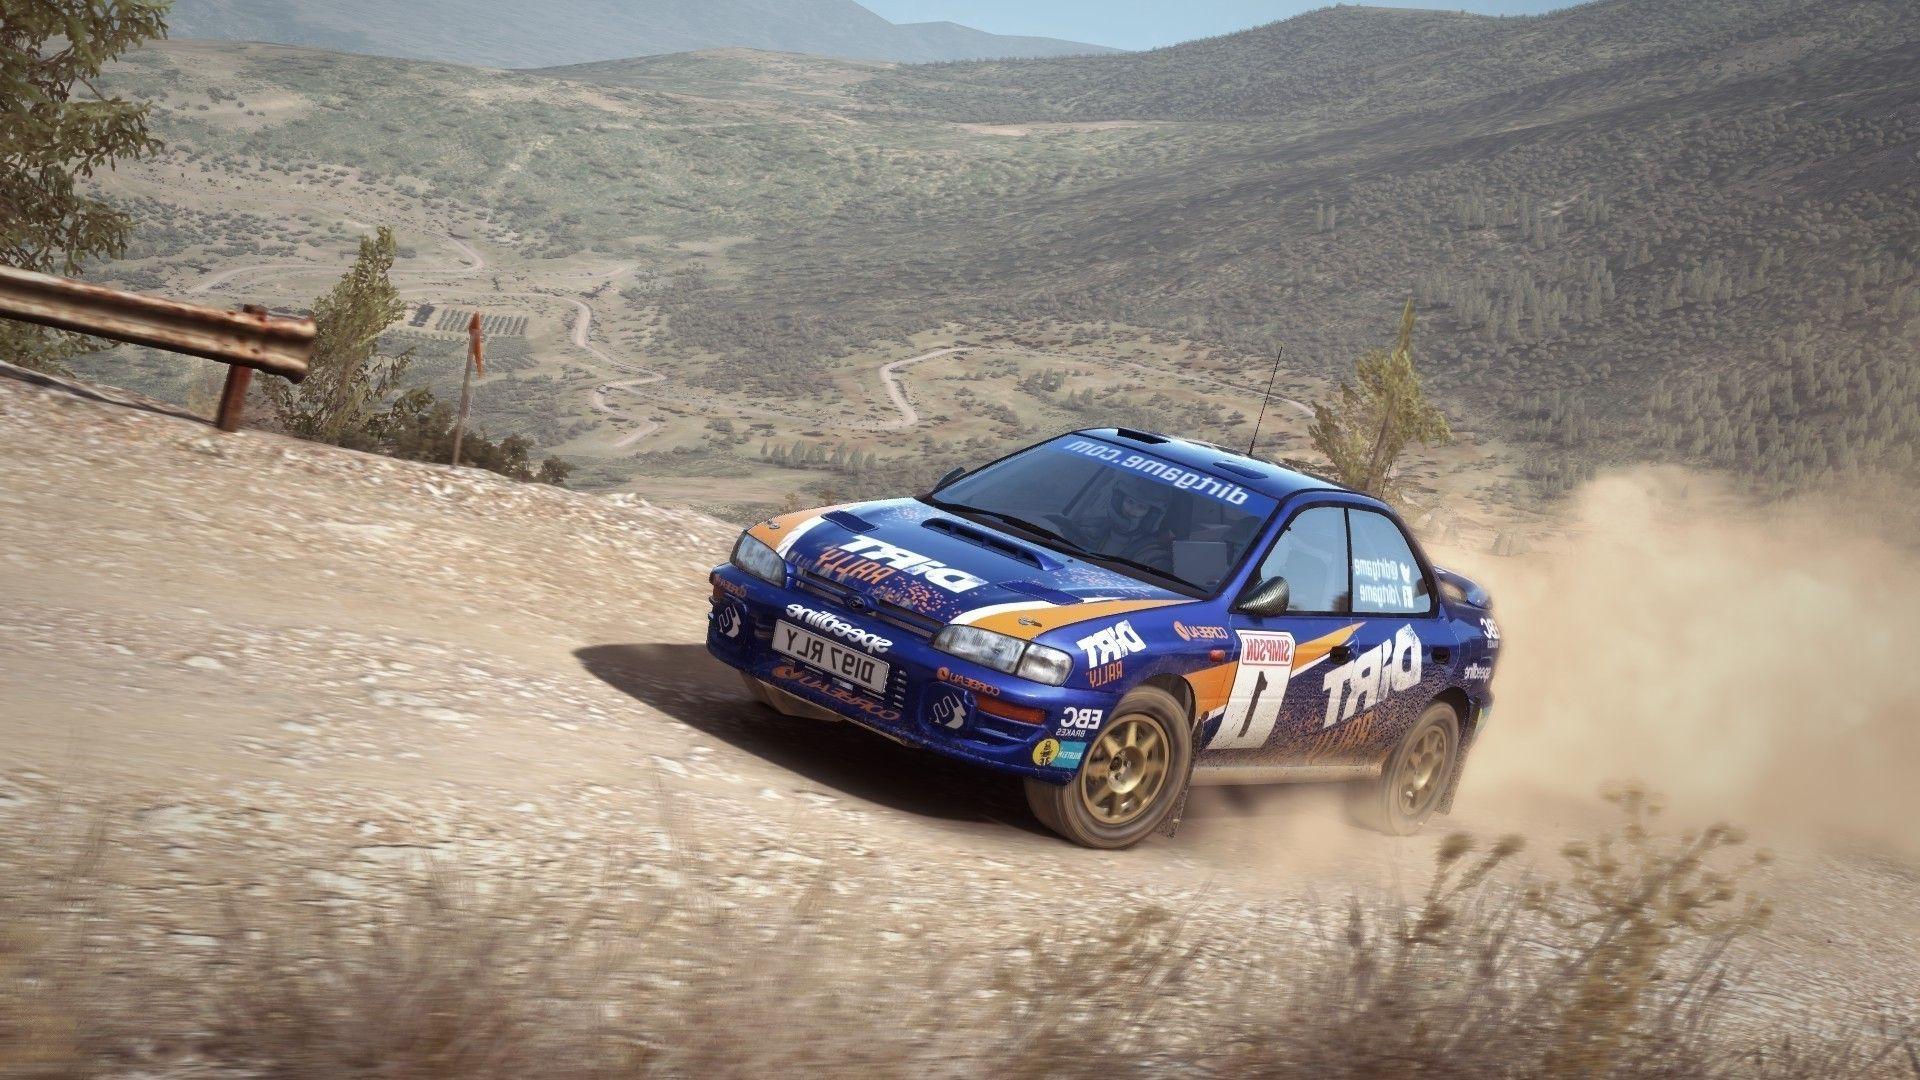 1366x768 dirt rally wallpapers